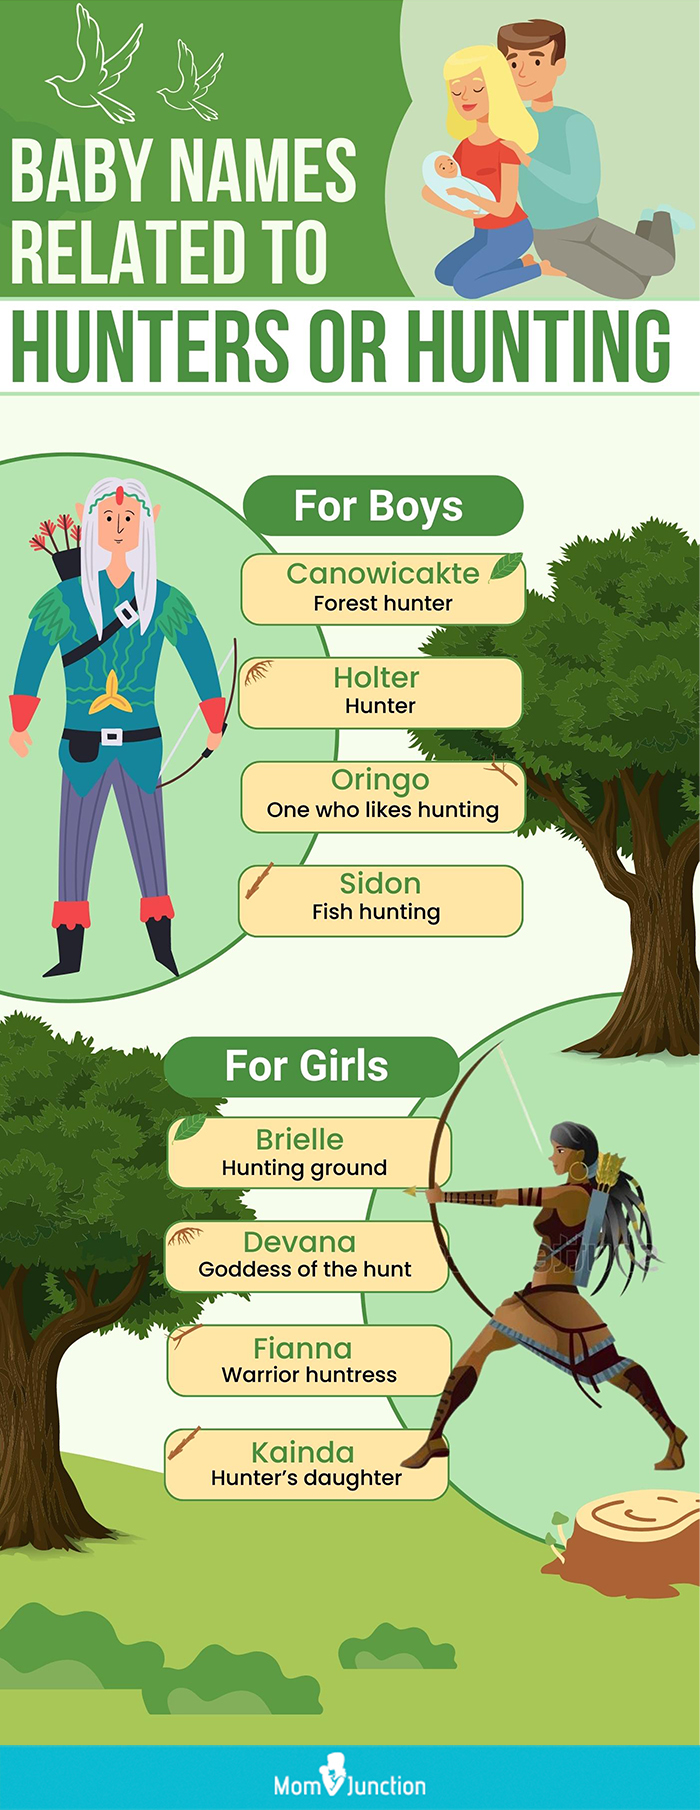 baby names related to hunters or hunting [infographic]